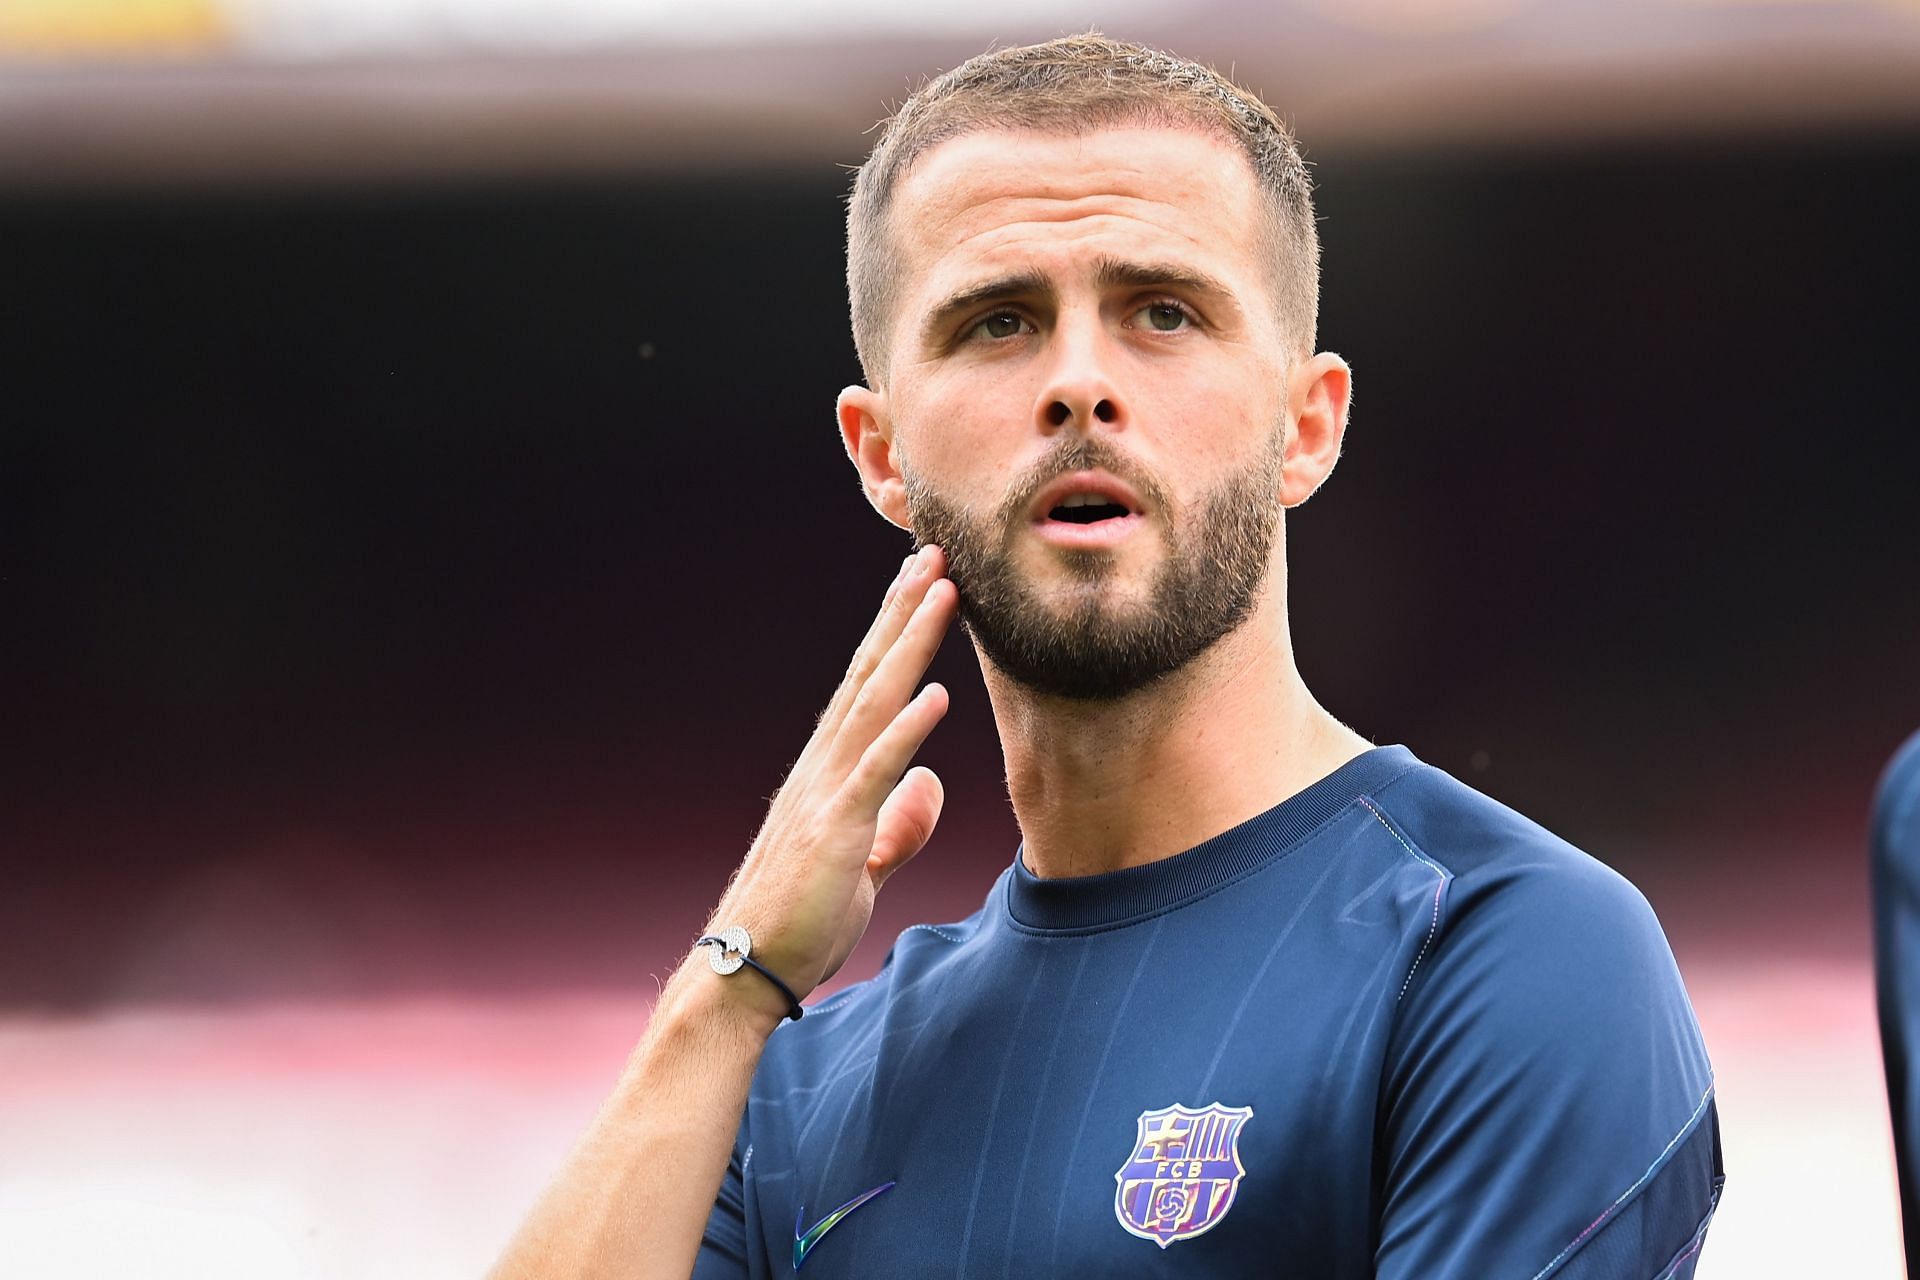 Miralem Pjanic has found himself in hot water after a photo of him smoking hookah spread via the media